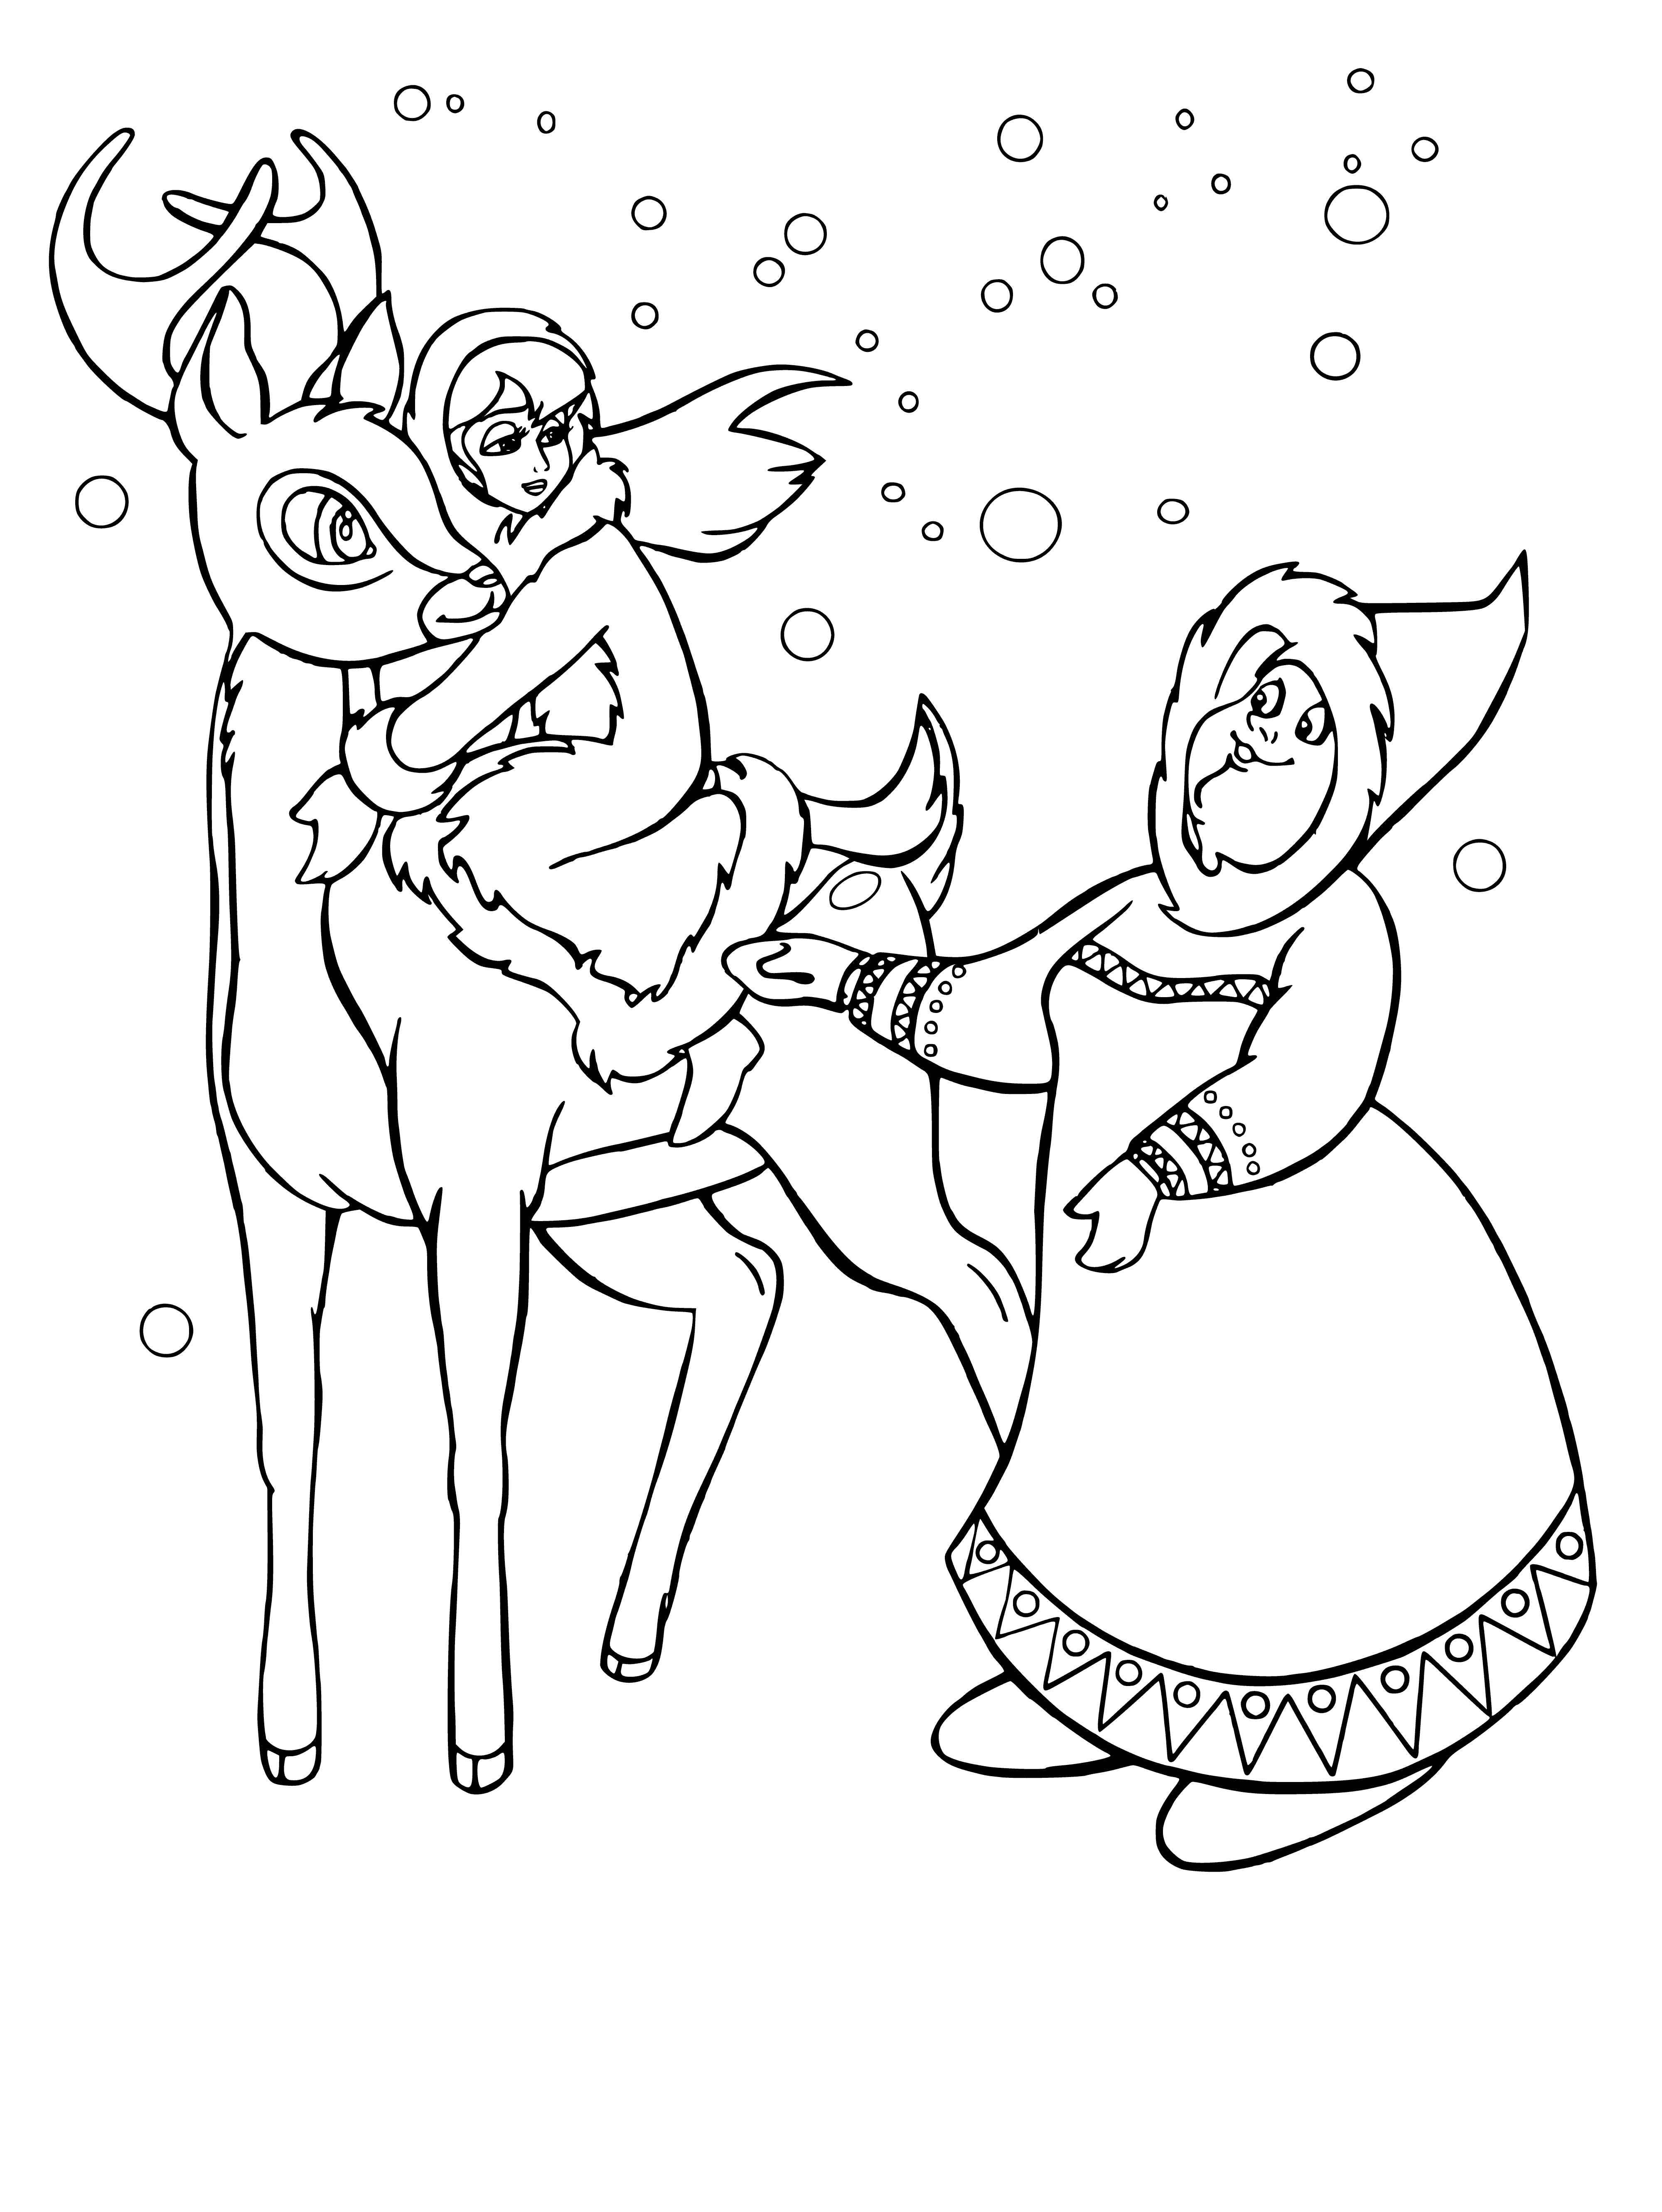 Lapland coloring page